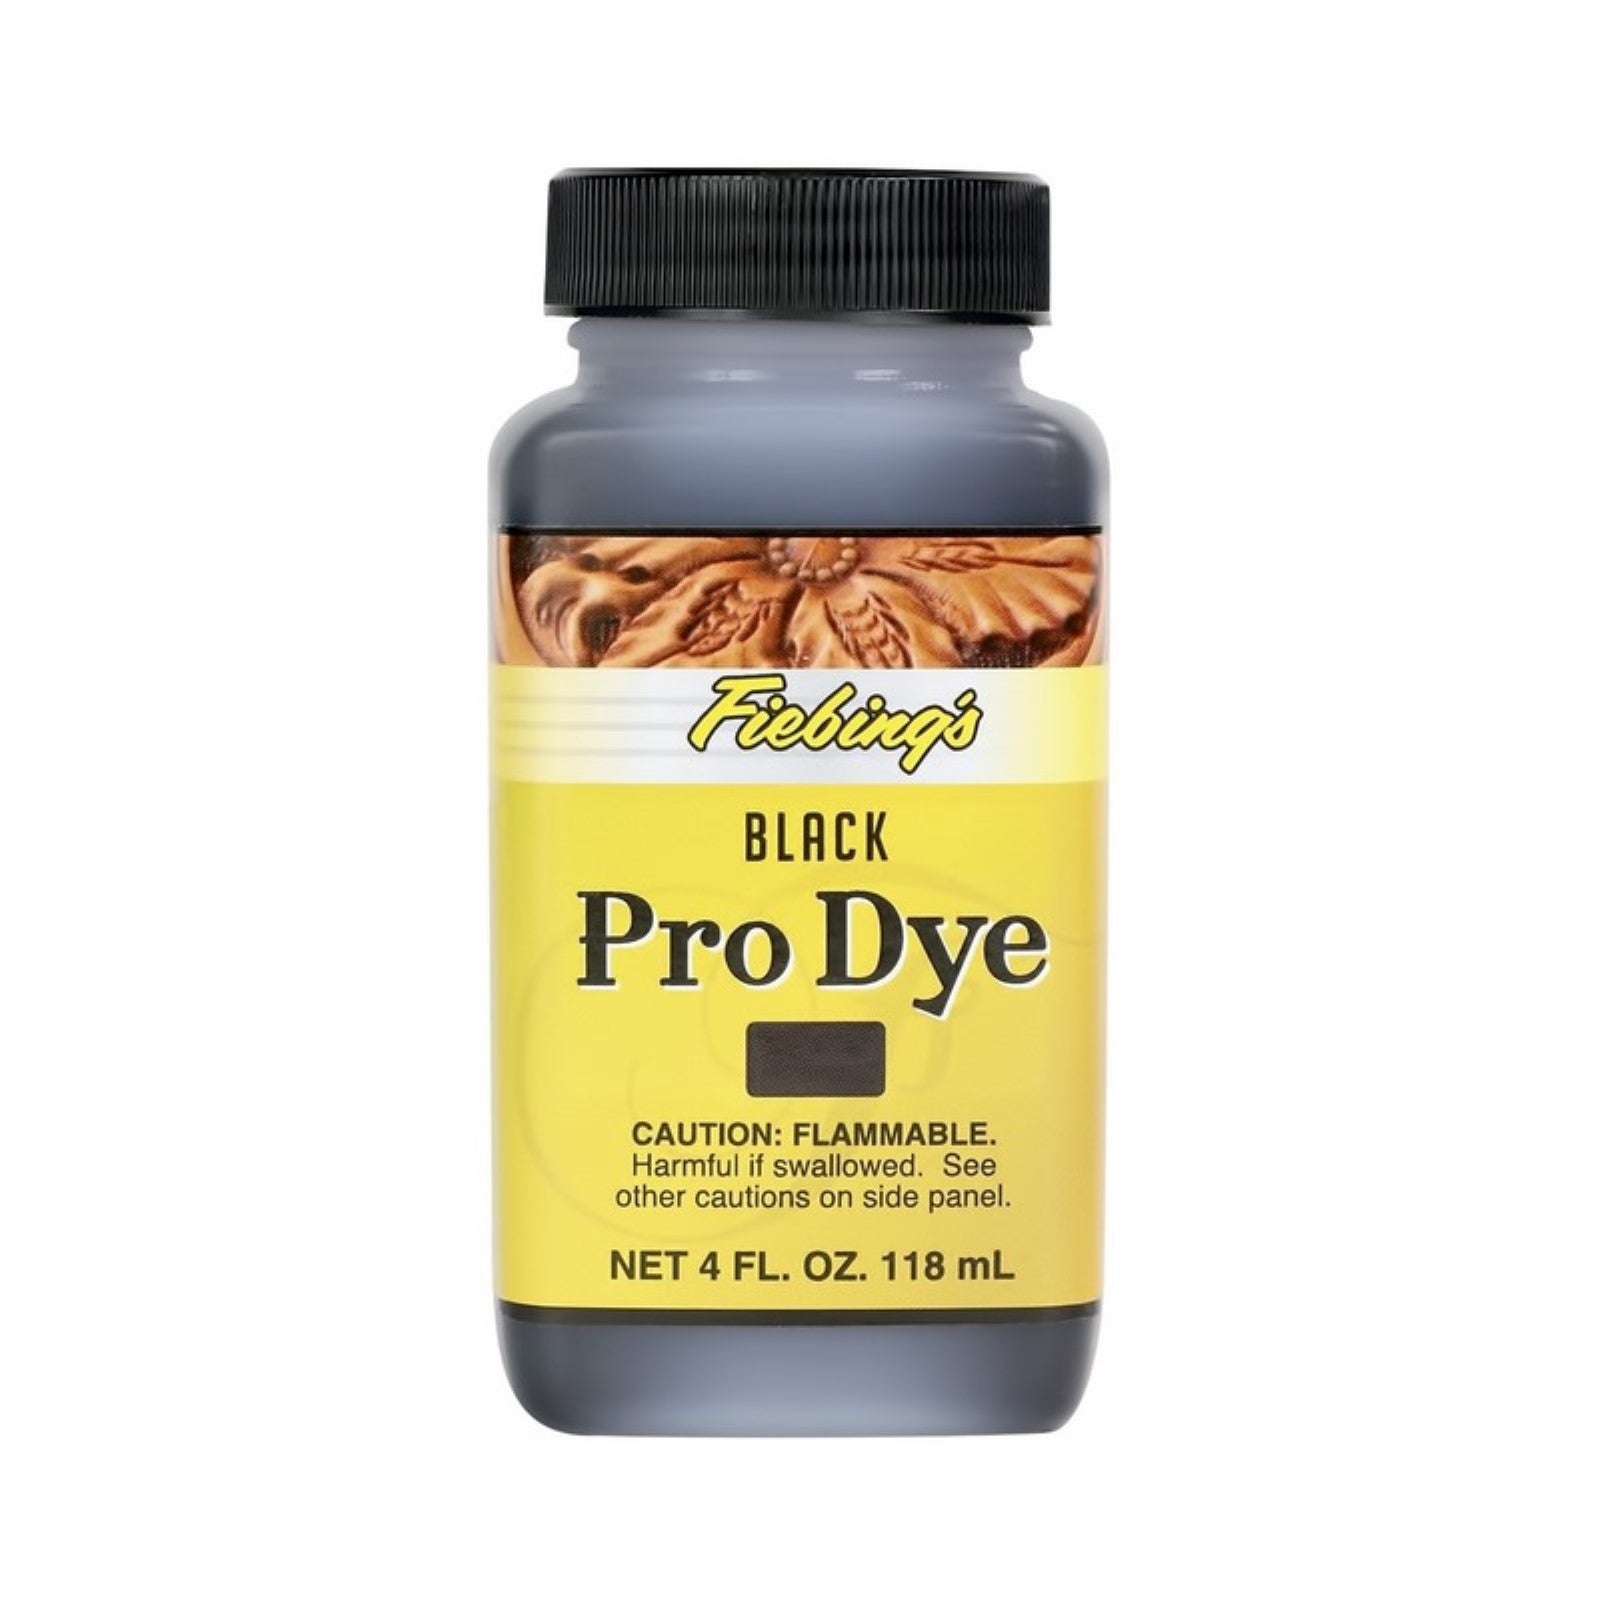 Fiebing's Pro Dye Leather Craft Dyes, 4 oz, Black | The Leather Guy